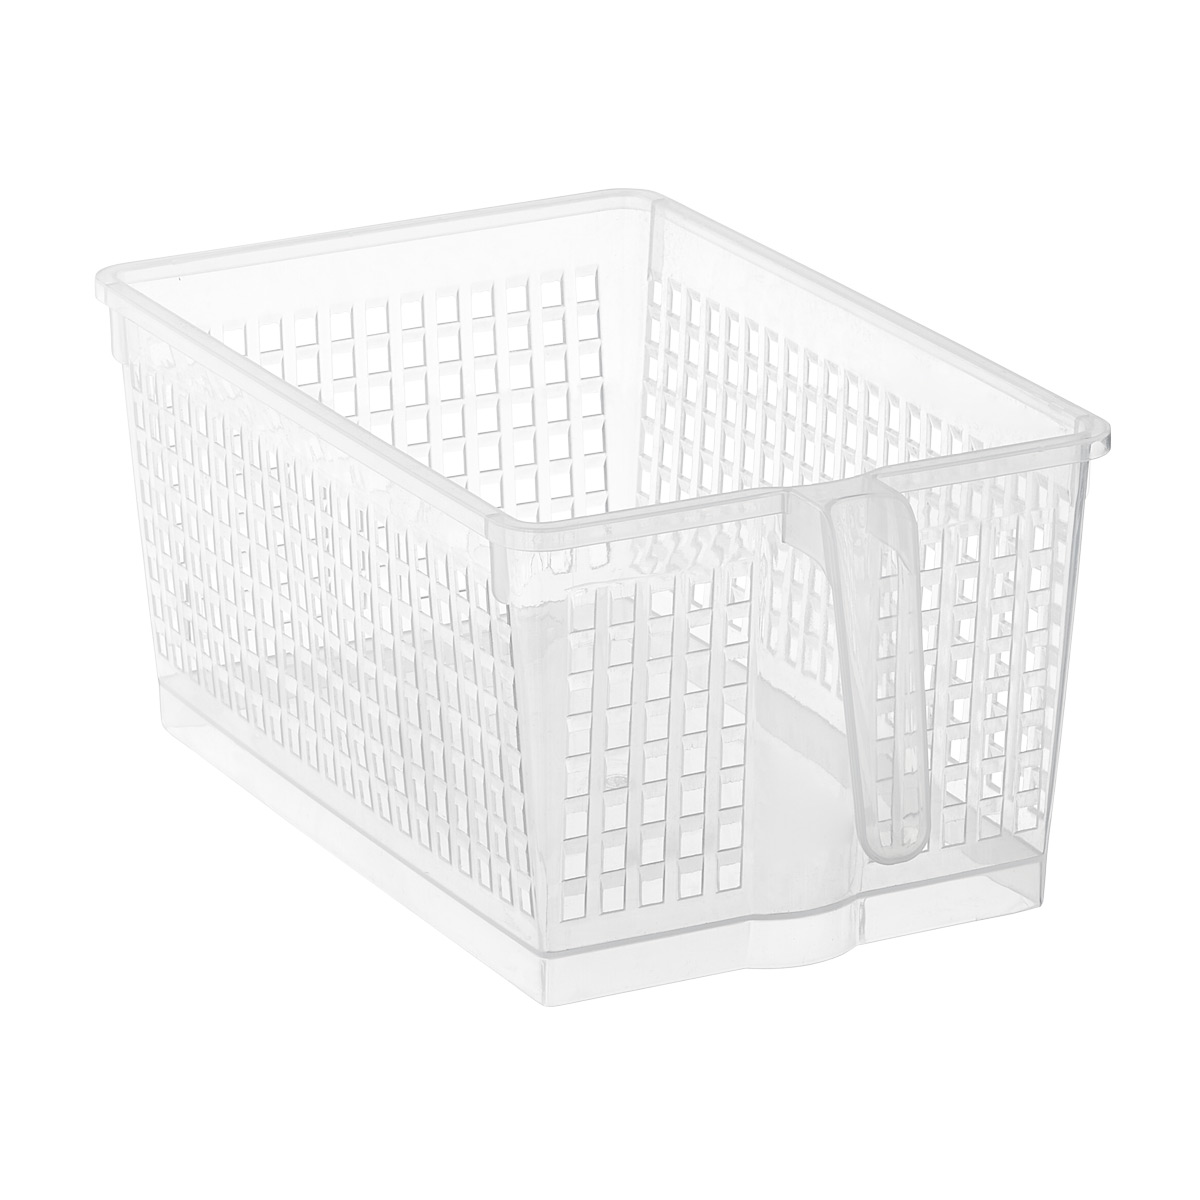 https://www.containerstore.com/catalogimages/424155/10083869_Large_Handy_Basket_Pantry_O.jpg